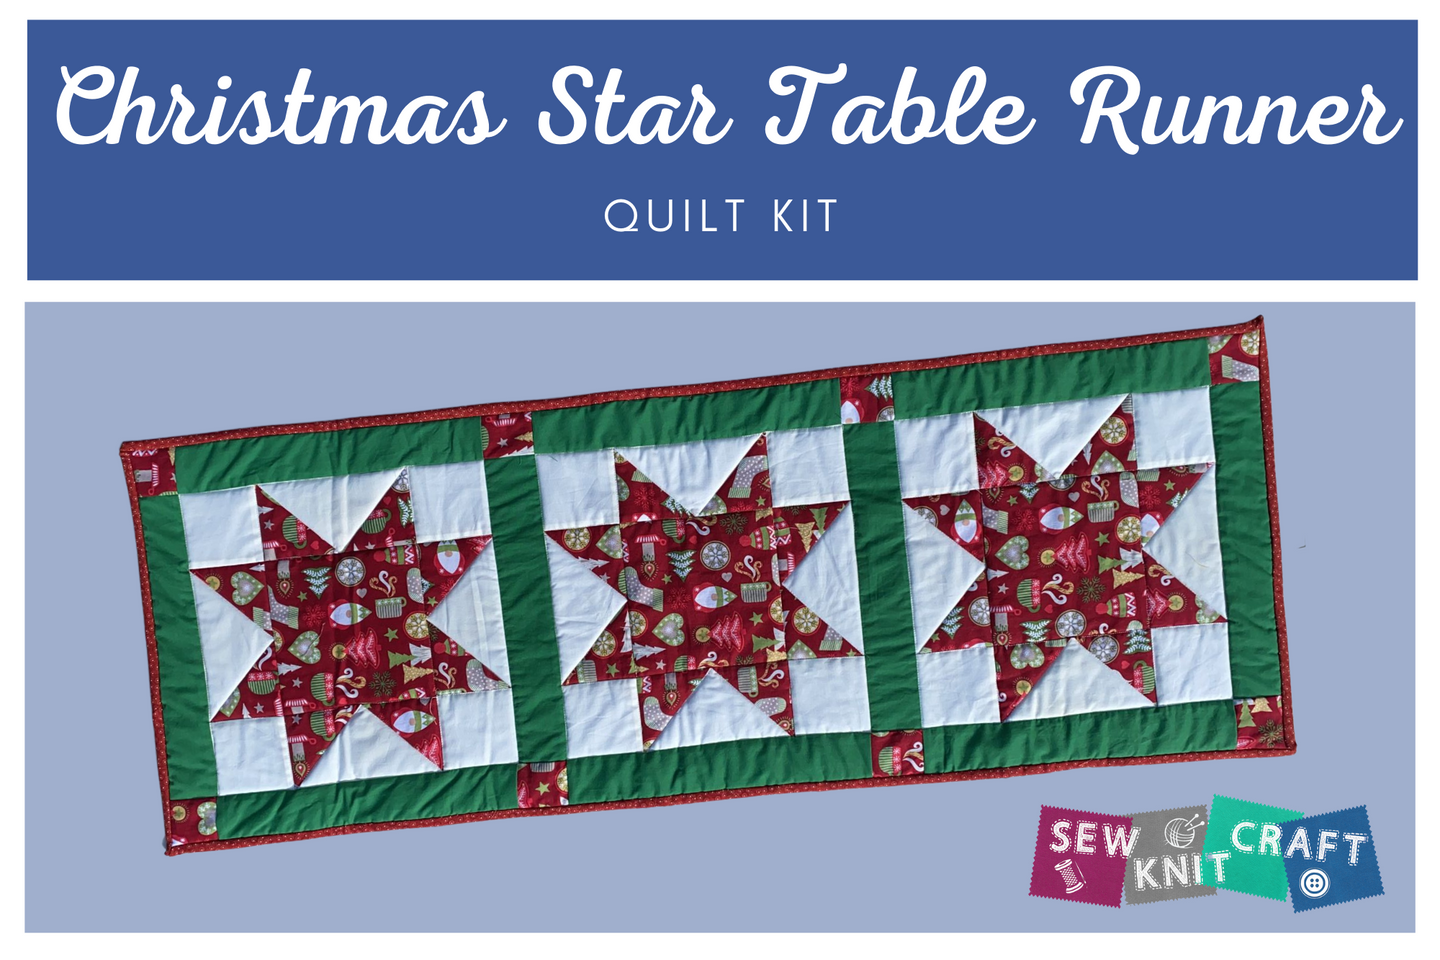 Quilted Christmas Table Runner Kits